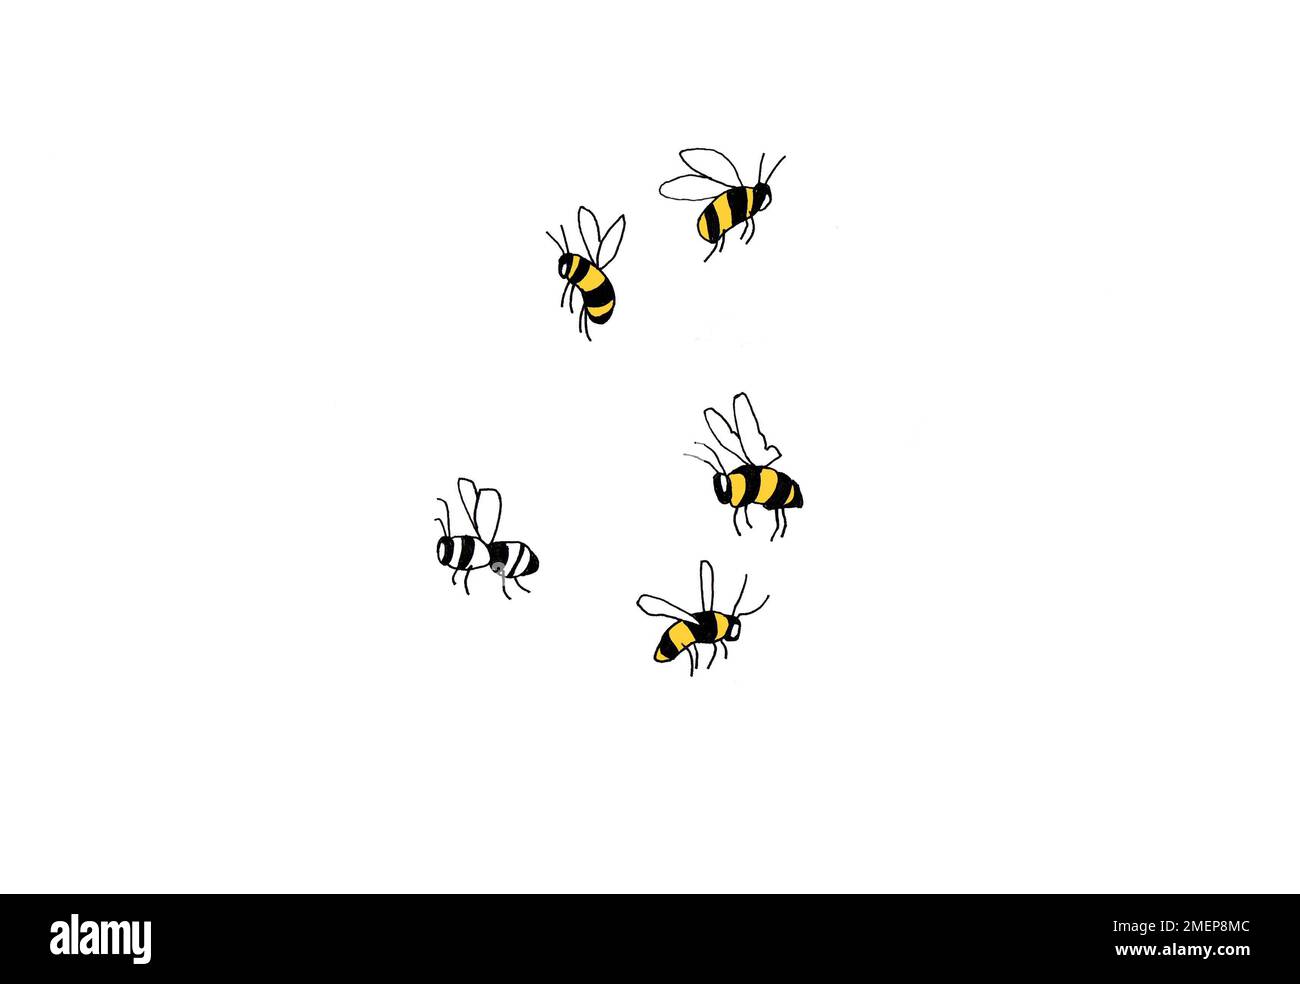 Illustration of a bees Stock Photo